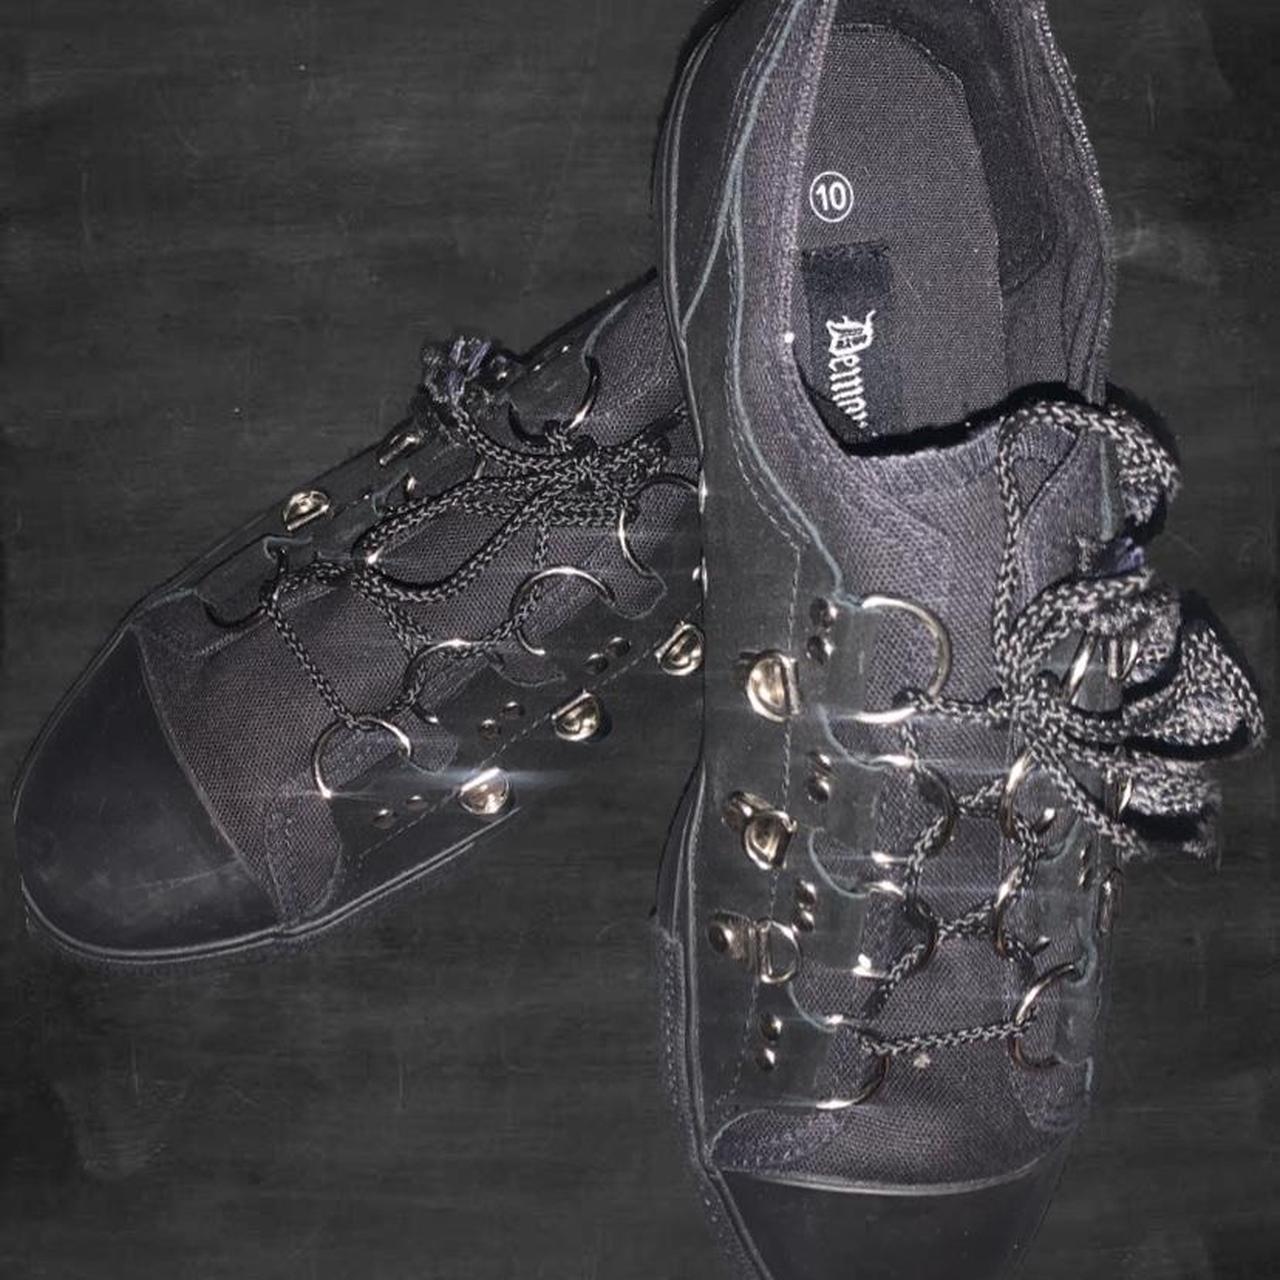 Demonia Men's Black and Silver Trainers (2)